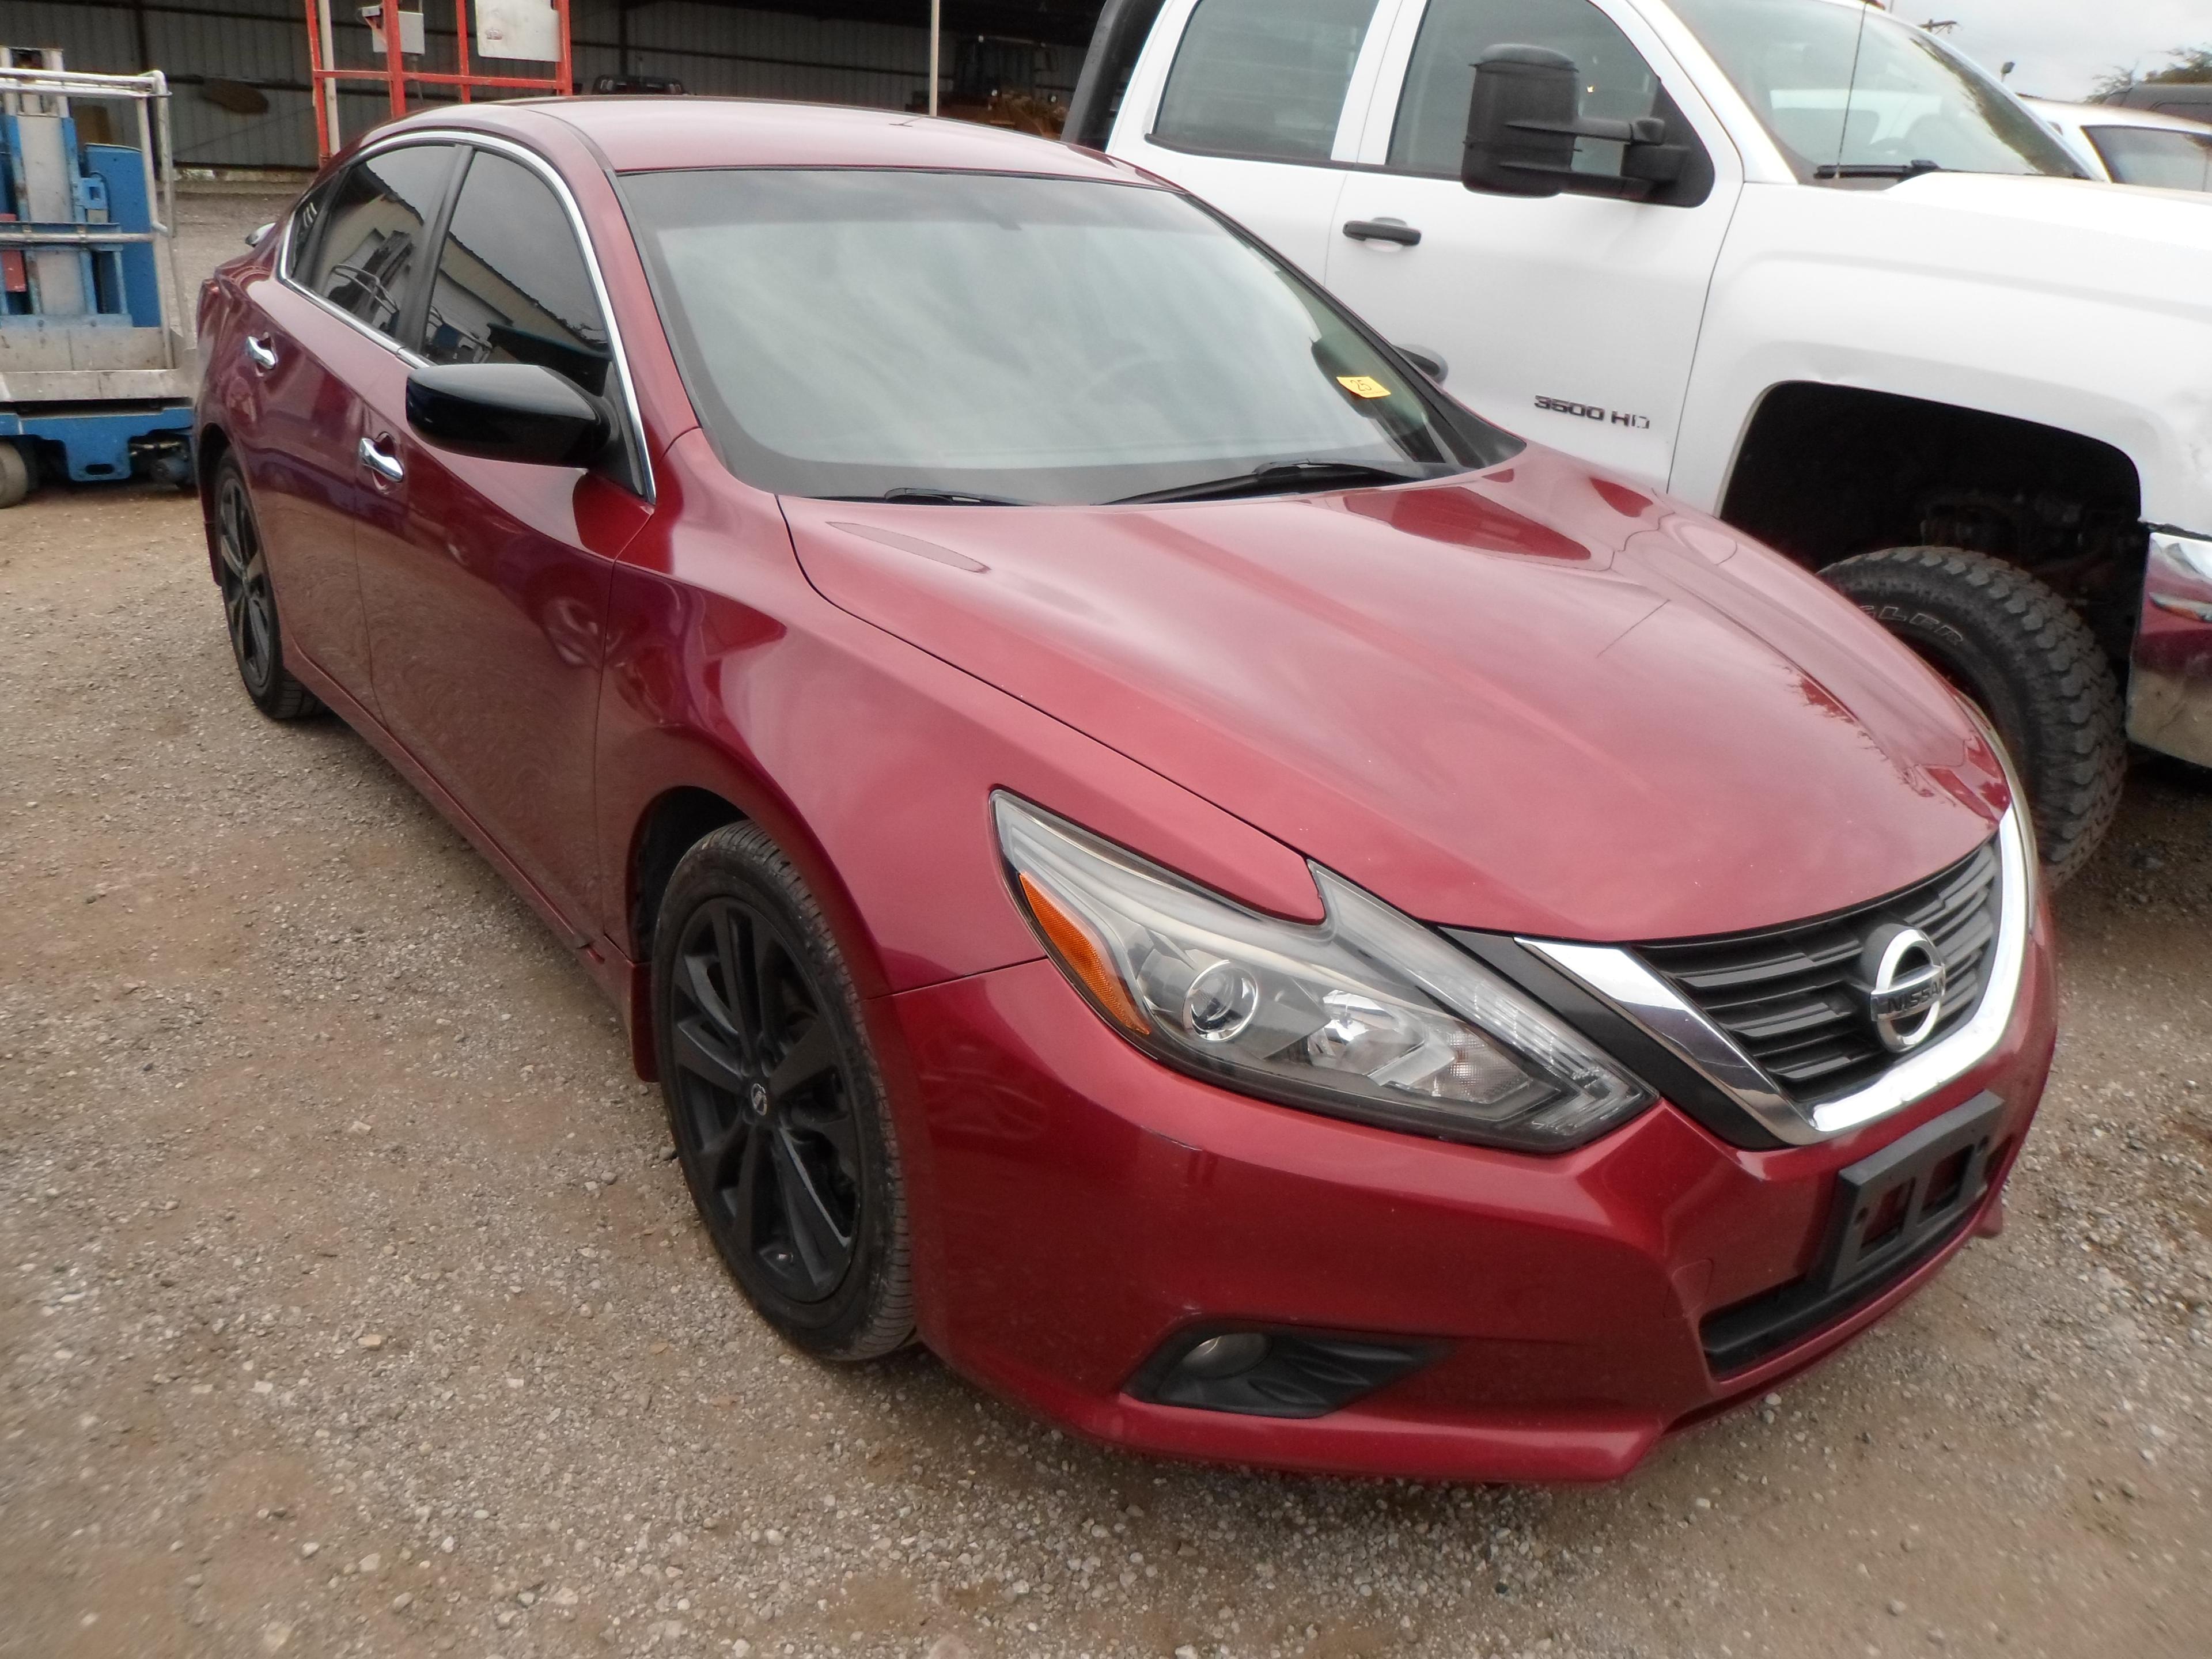 2017 NISSAN (VIN # 1N4AL3AP1HN334910) (SHOWING APPX 115,537 MILES,  UP TO BUYER TO DO THEIR DUE DILI